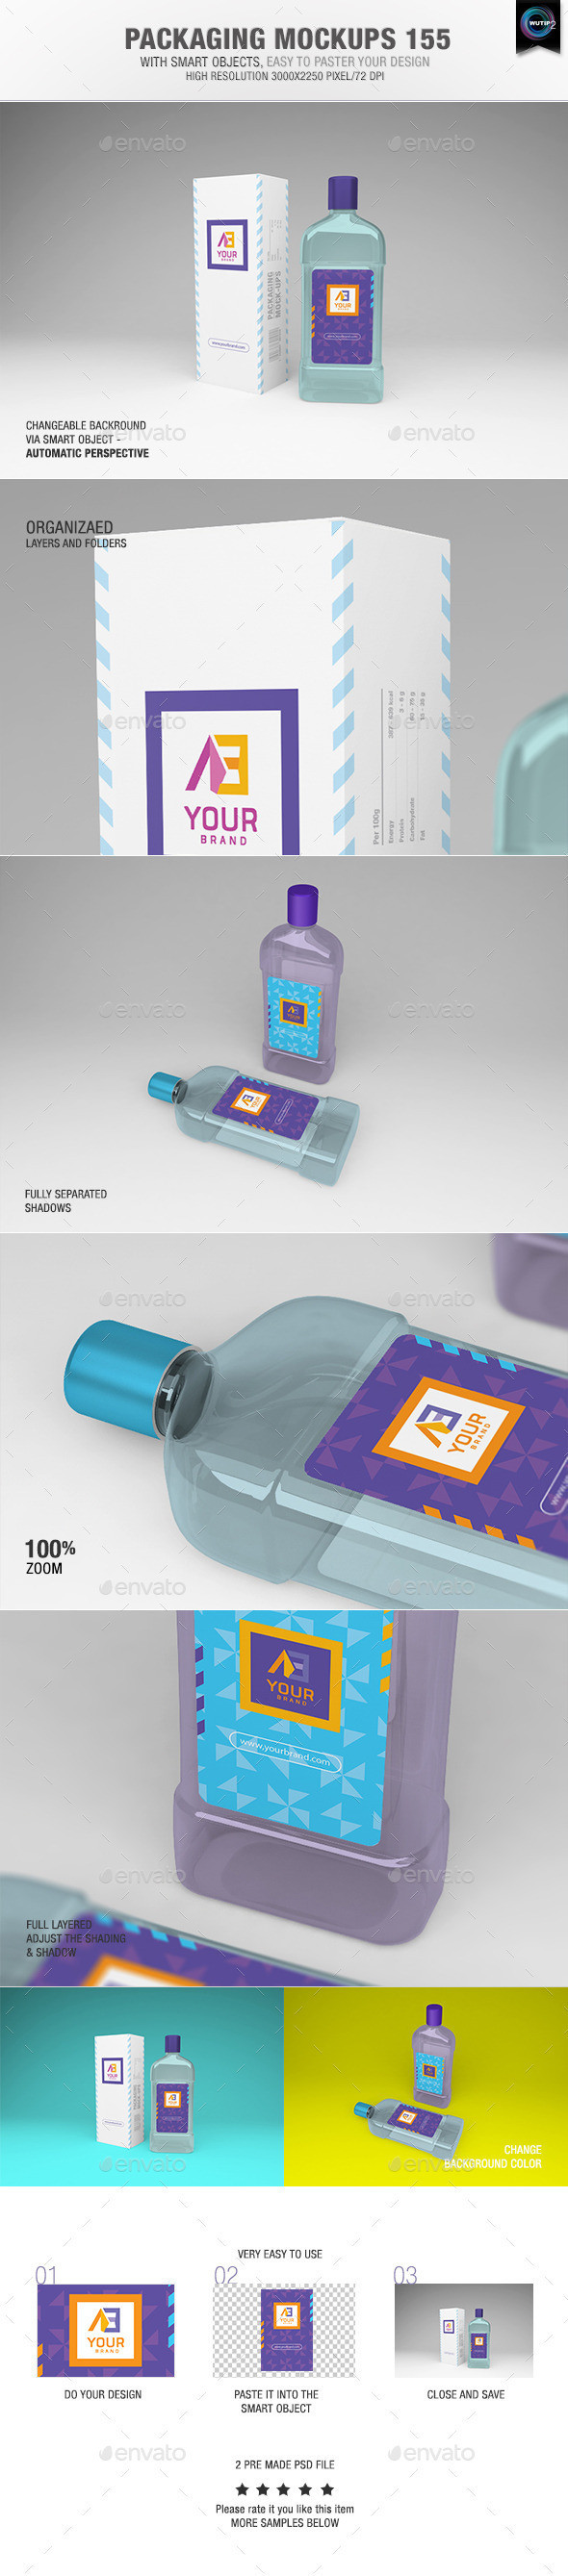 Packaging 20mockups 20155 20preview